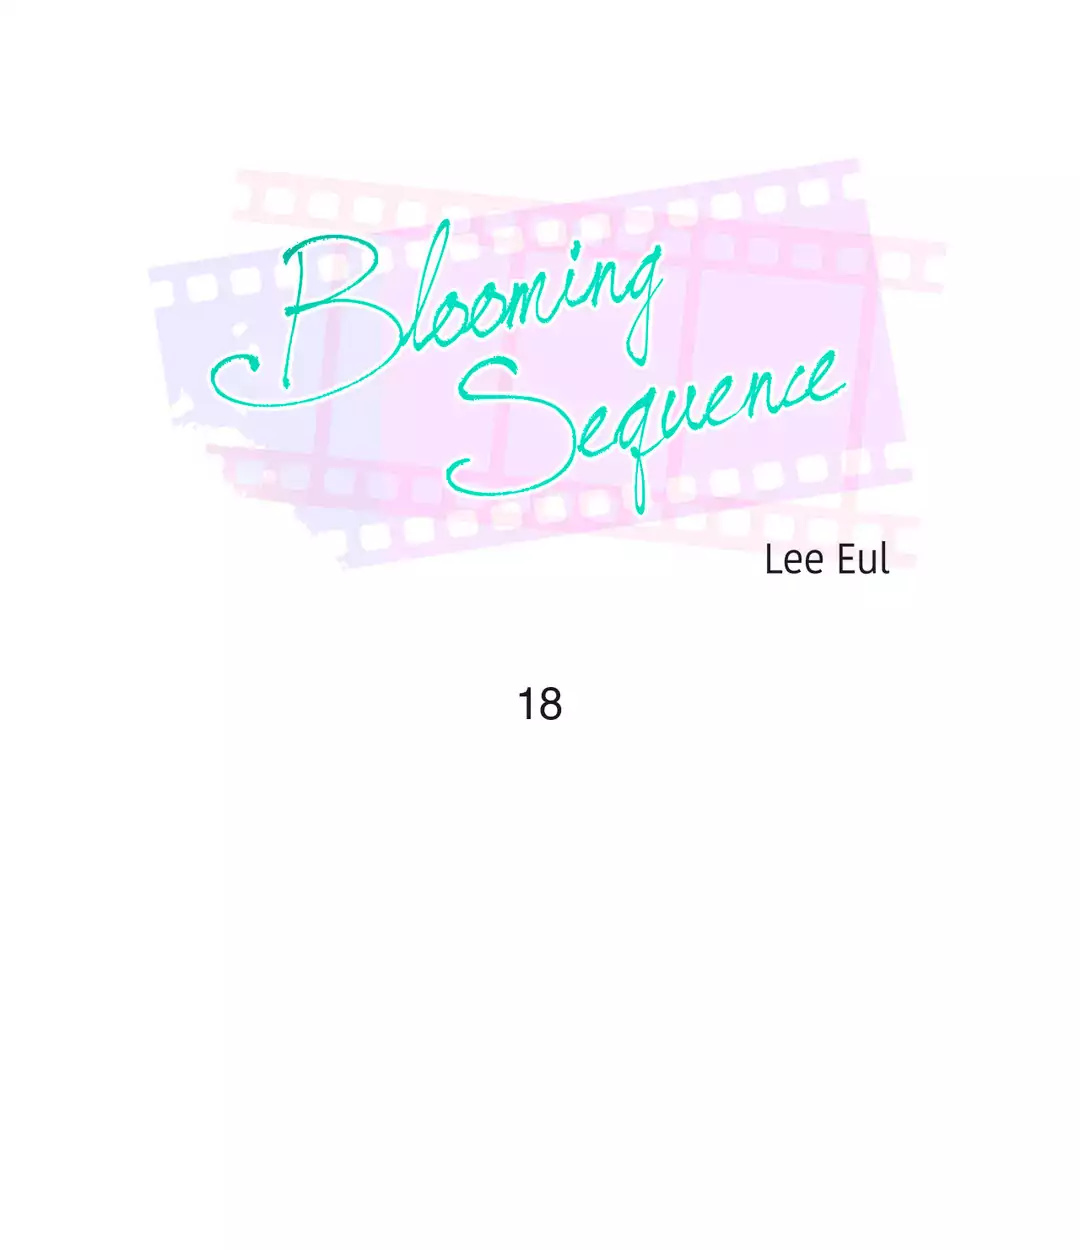 Blooming Sequence image